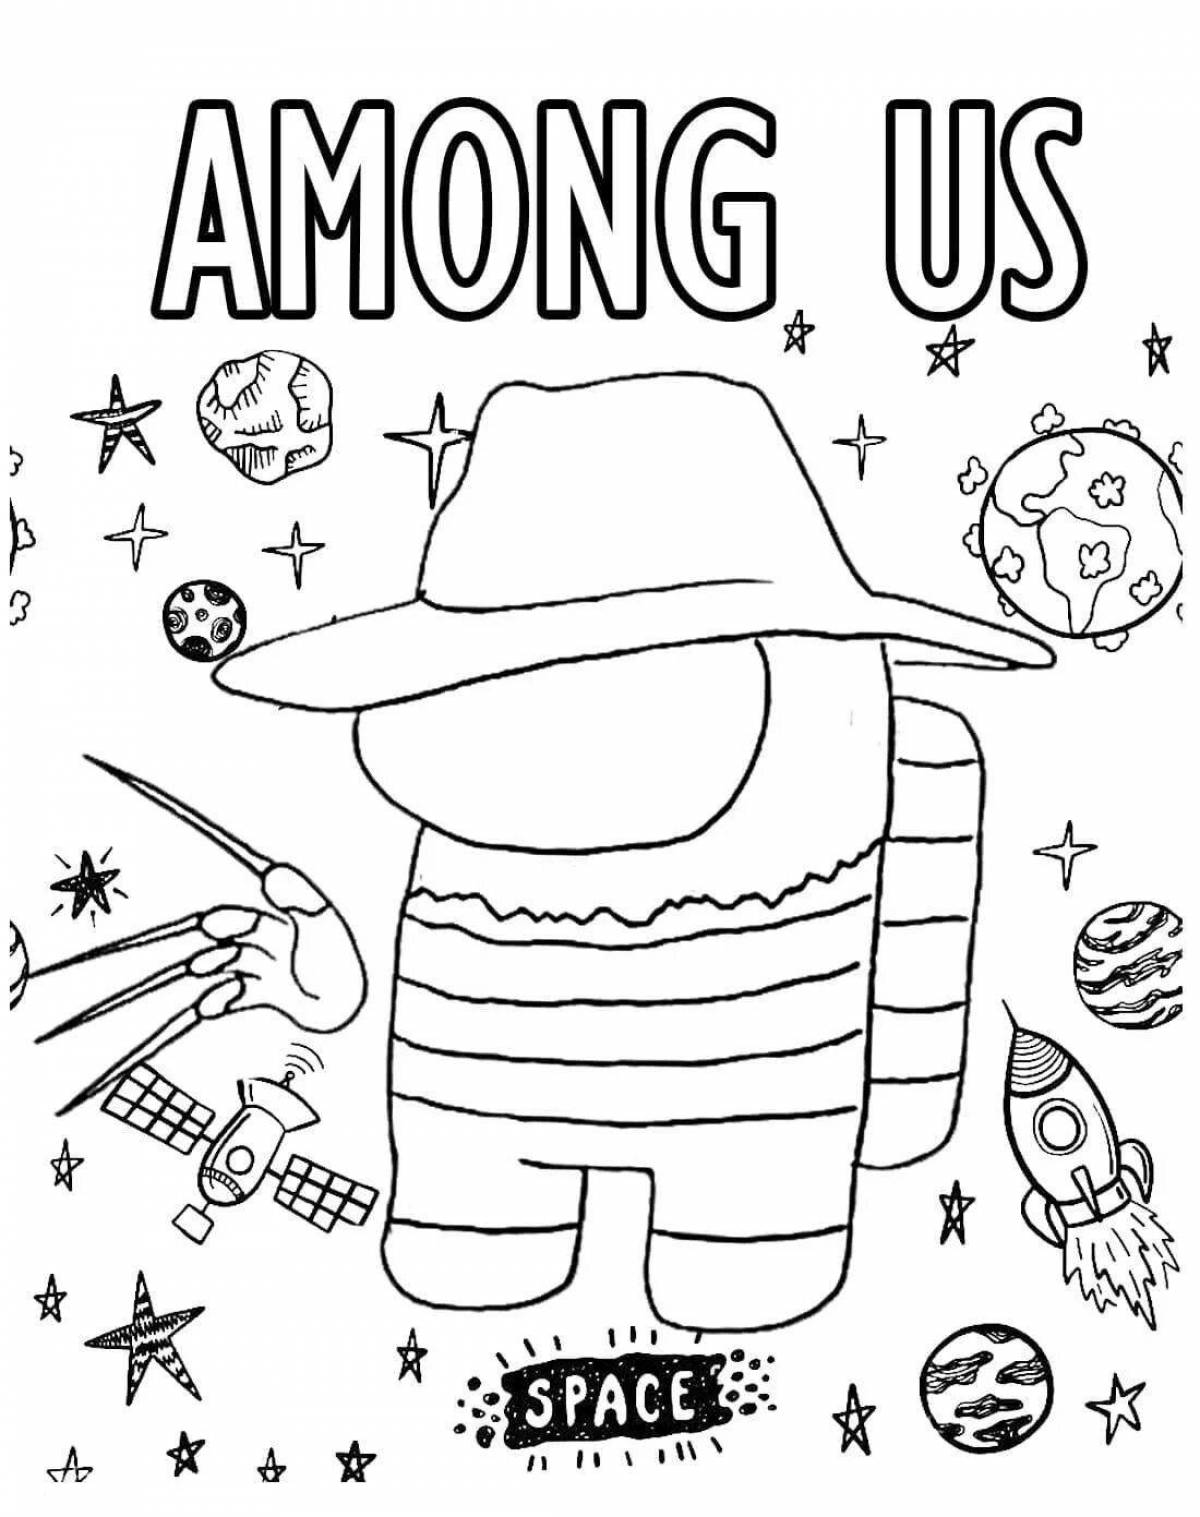 Amazing aces coloring page